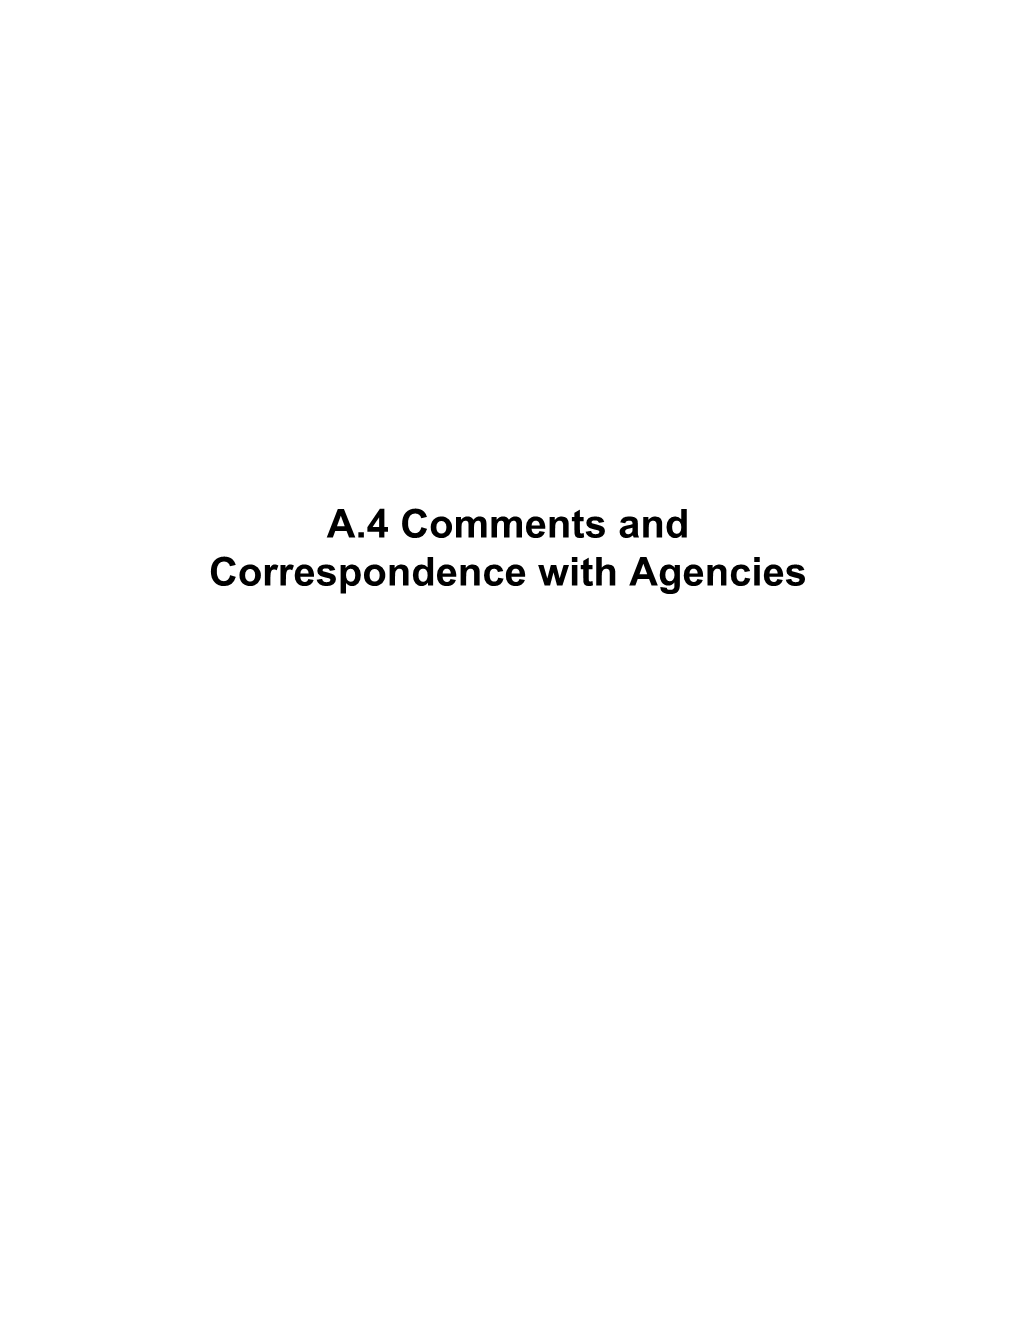 A.4 Comments and Correspondence With